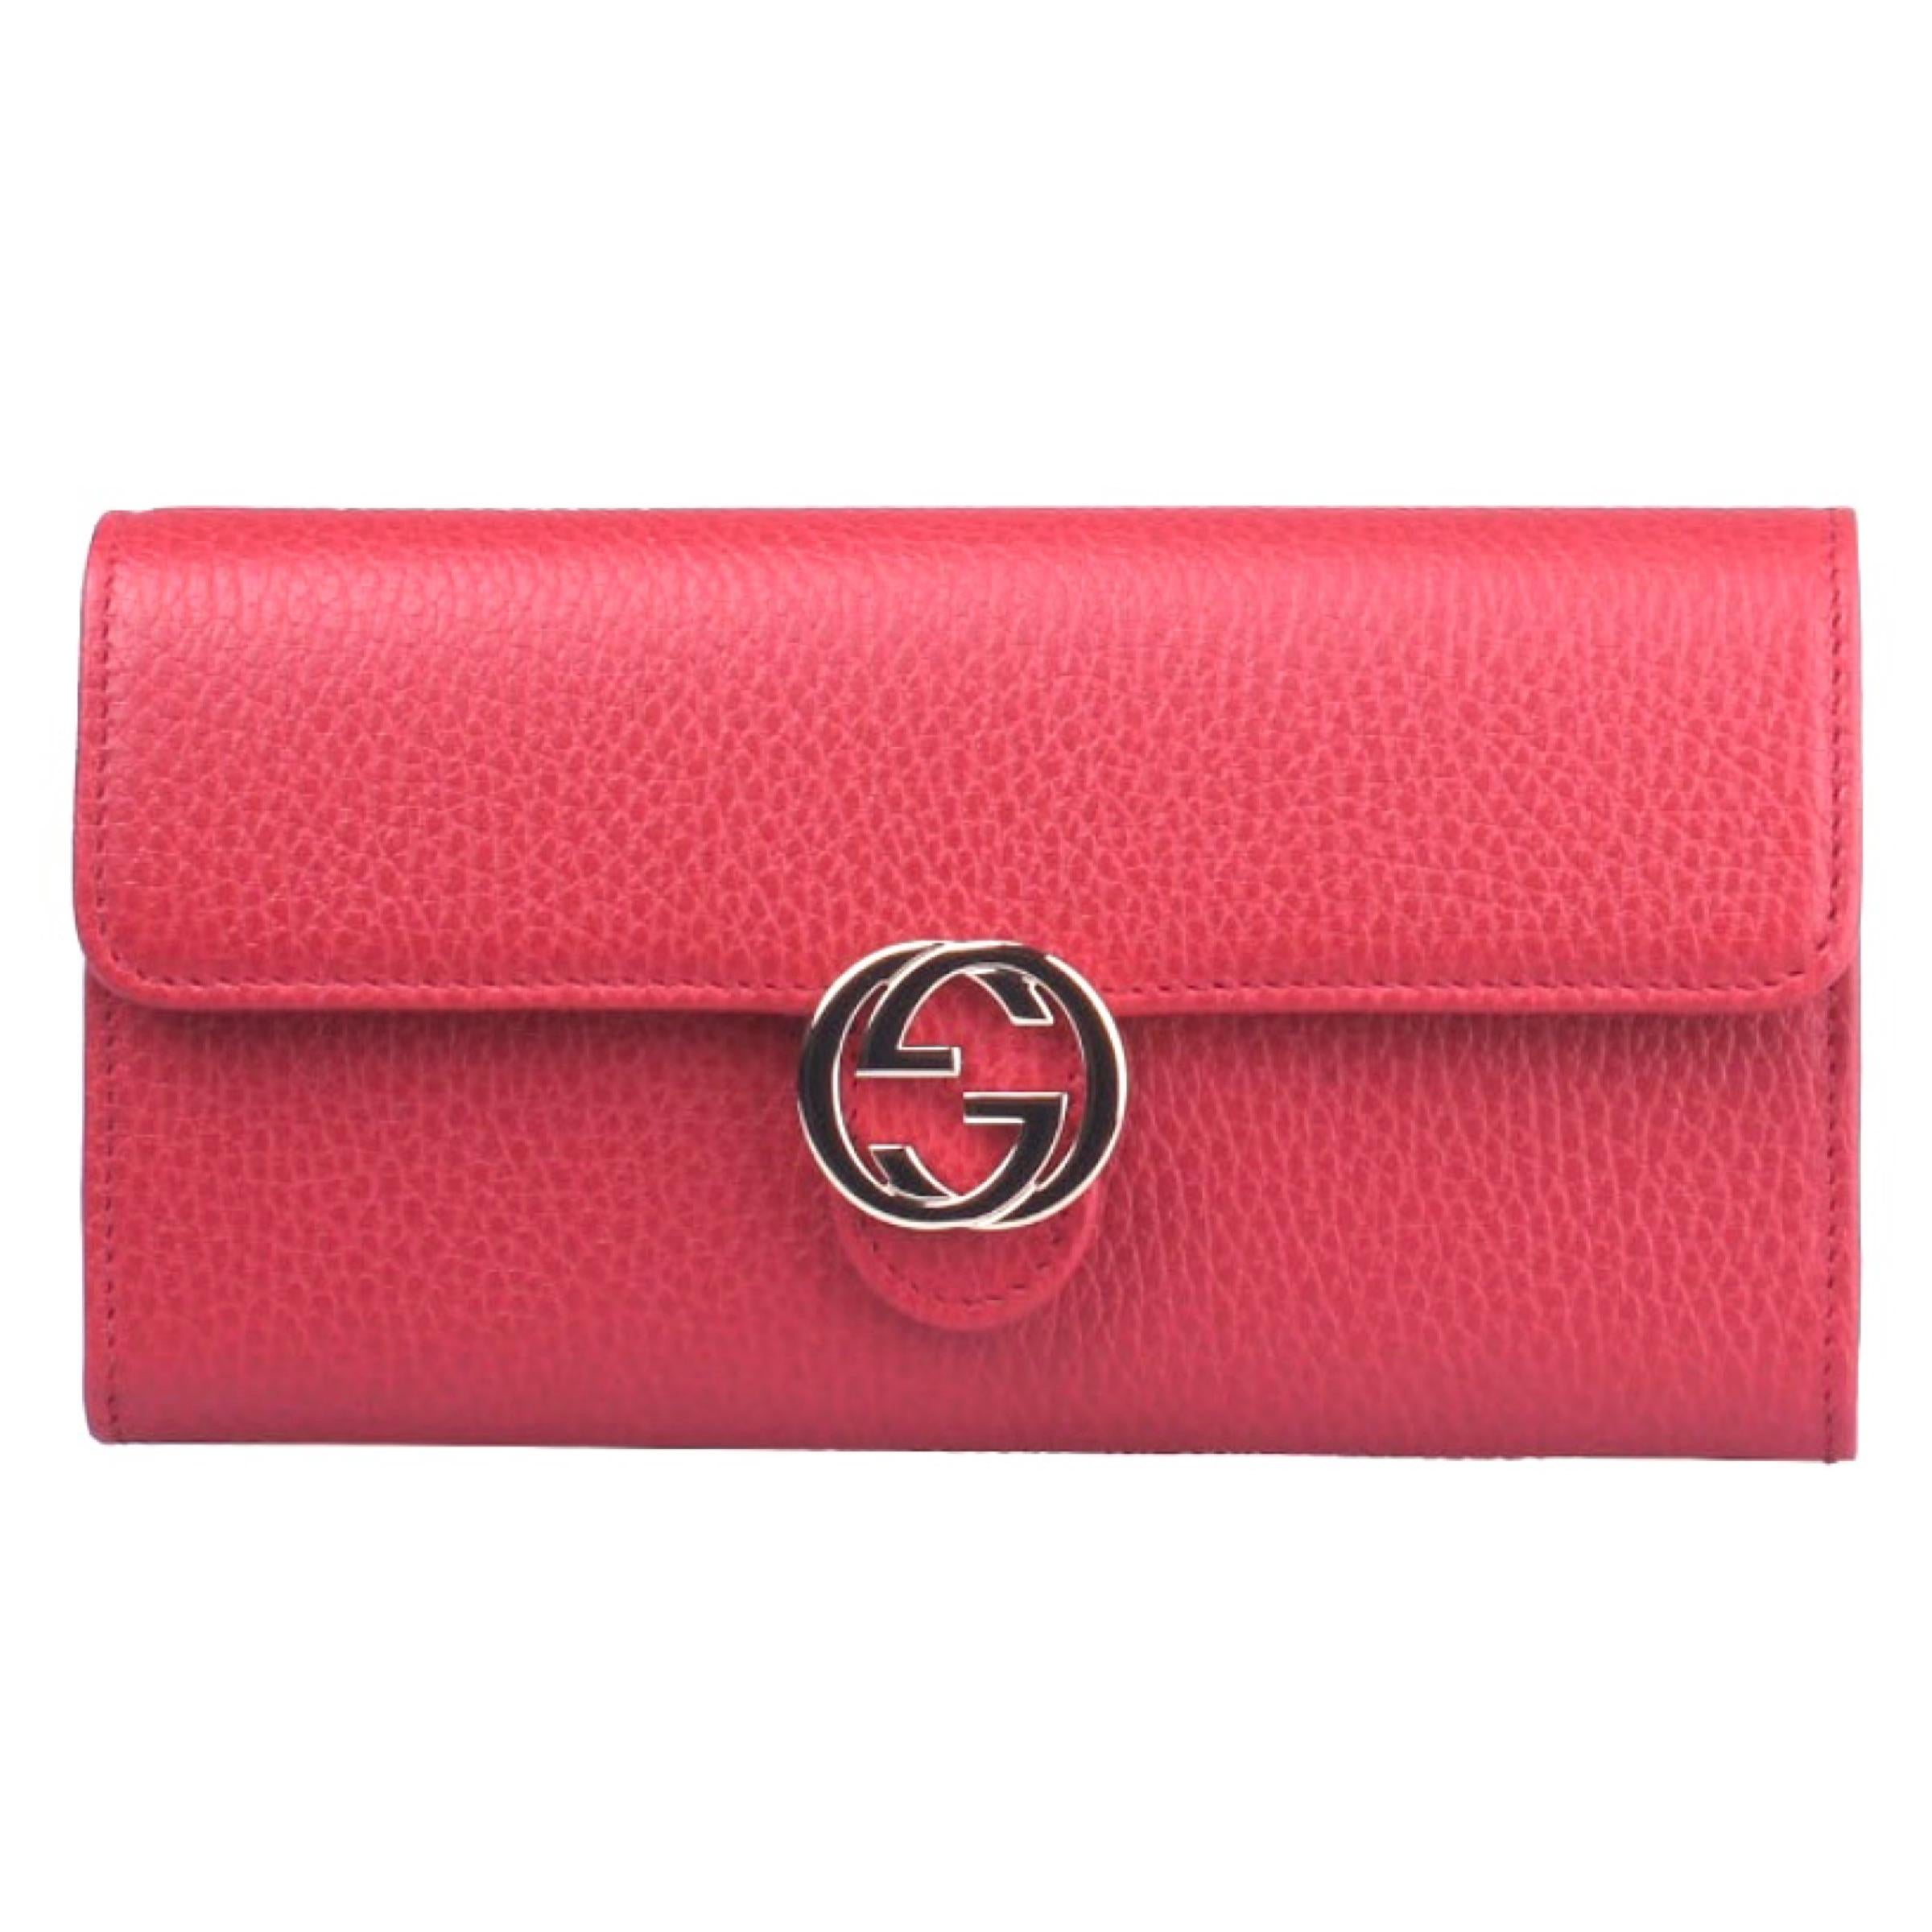 New Gucci Red Interlocking G Leather Long Wallet Clutch Bag

Authenticity Guaranteed

DETAILS
Brand: Gucci
Condition: Brand new
Gender: Women
Category: Clutch
Color: Black
Material: Leather
Interlocking G plaque
Gold-tone hardware
Snap button